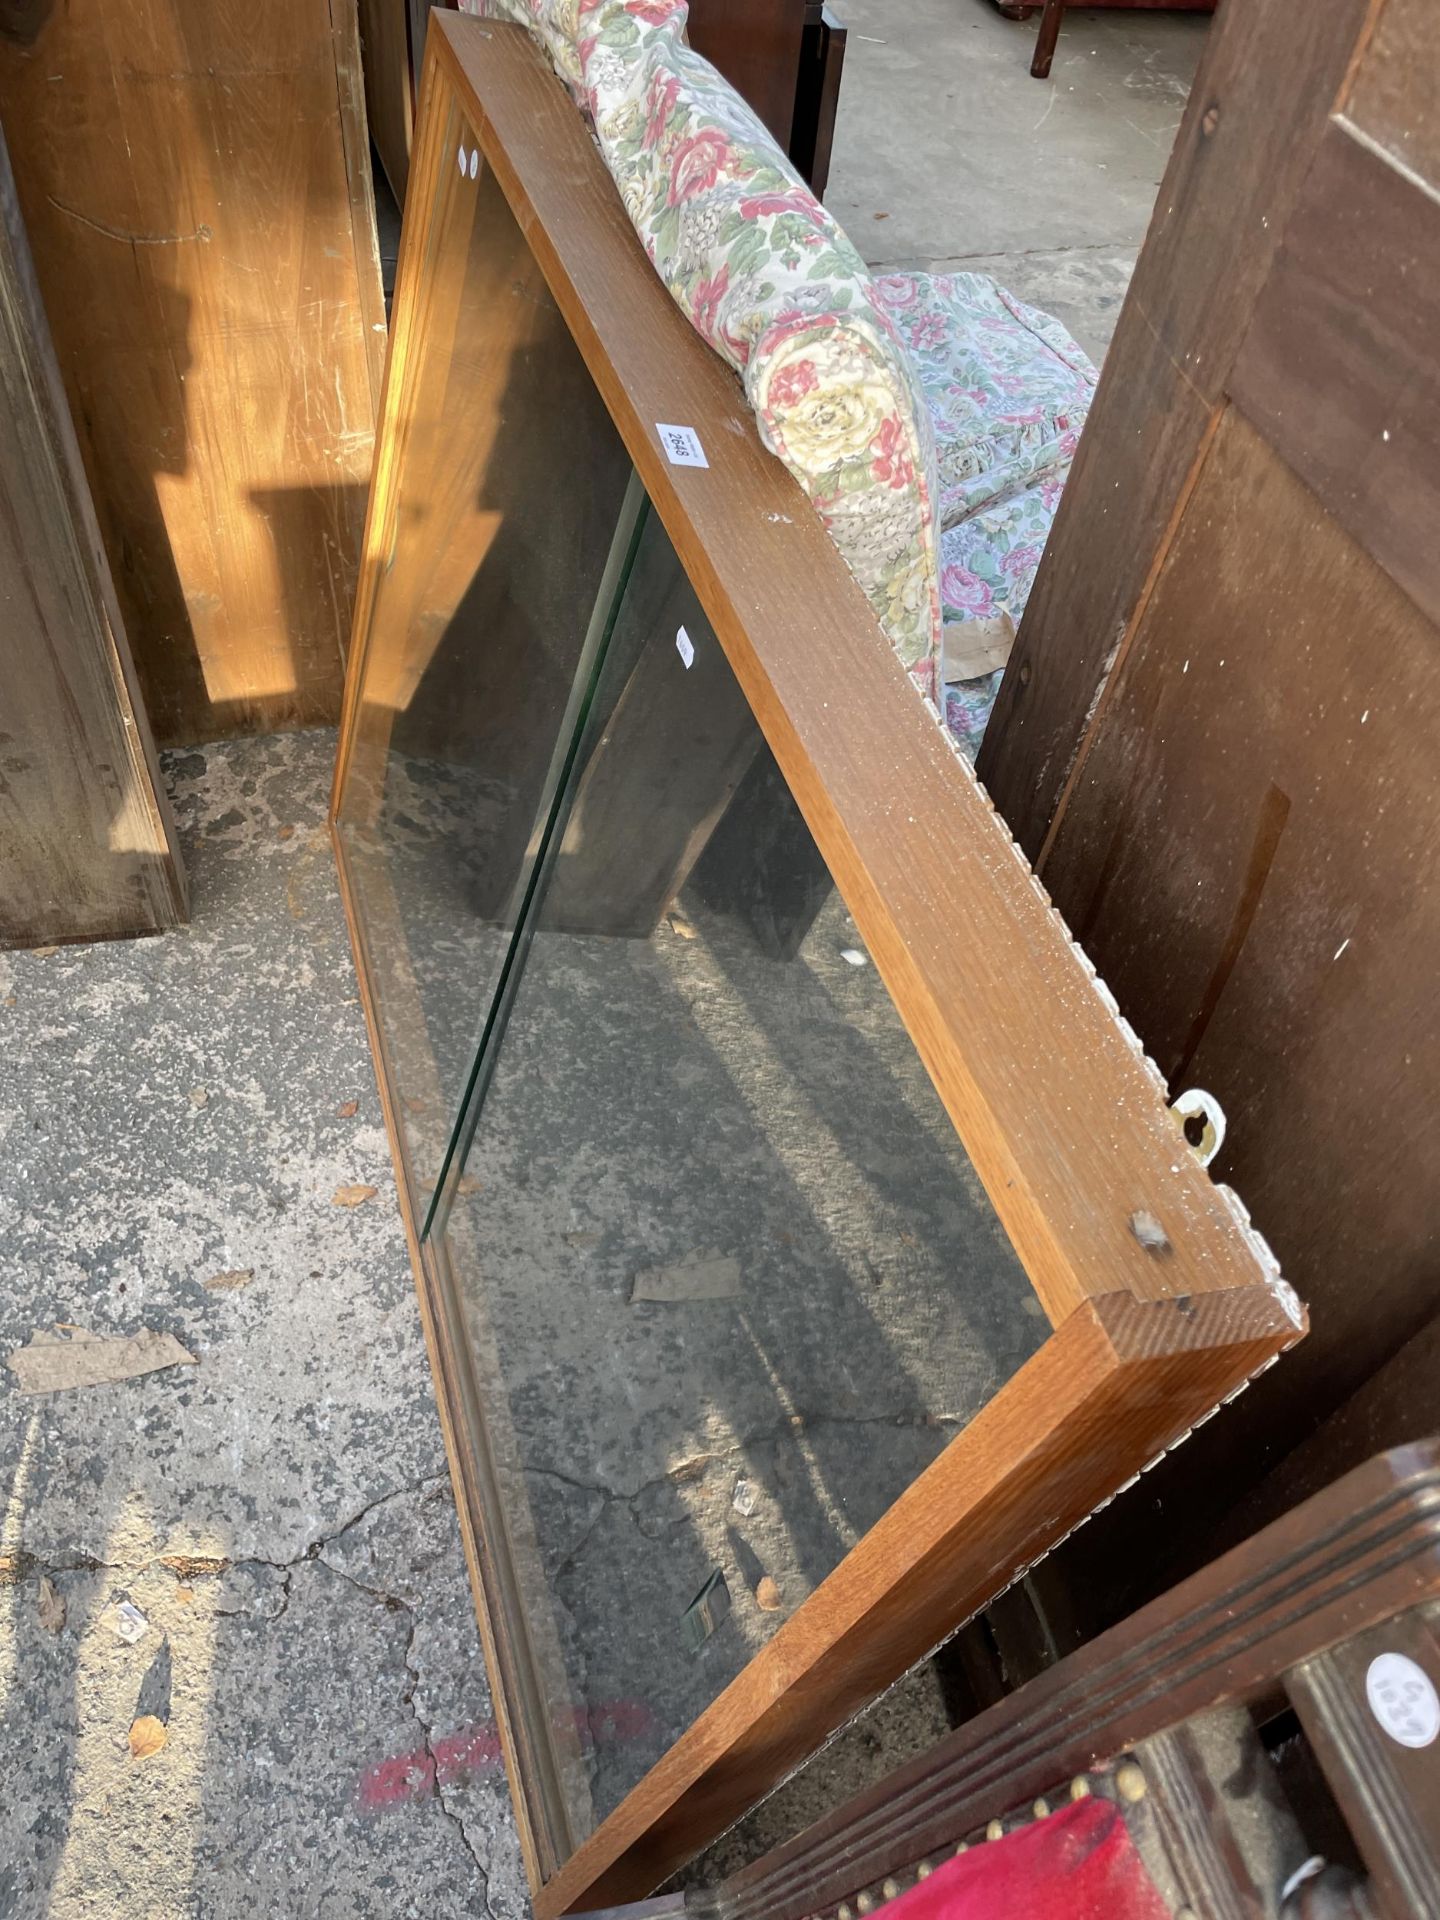 AN OAK FRAMED GLASS FRONTED WALL CABINET - Image 2 of 2